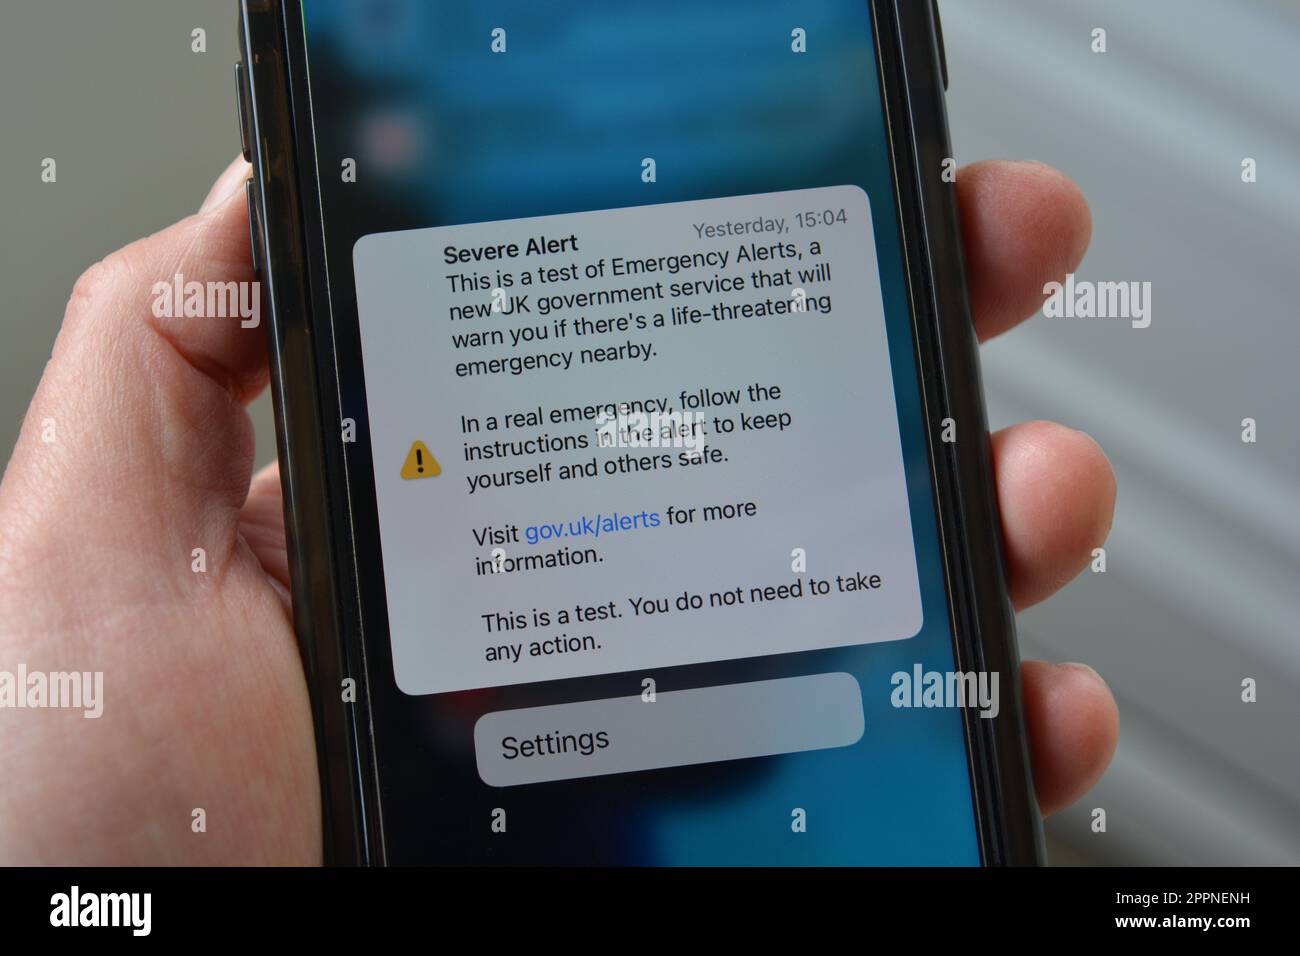 Cellphone in hand with screen showing text of test for Severe Alert, This is a test of Emergency Alerts, a new government service Stock Photo